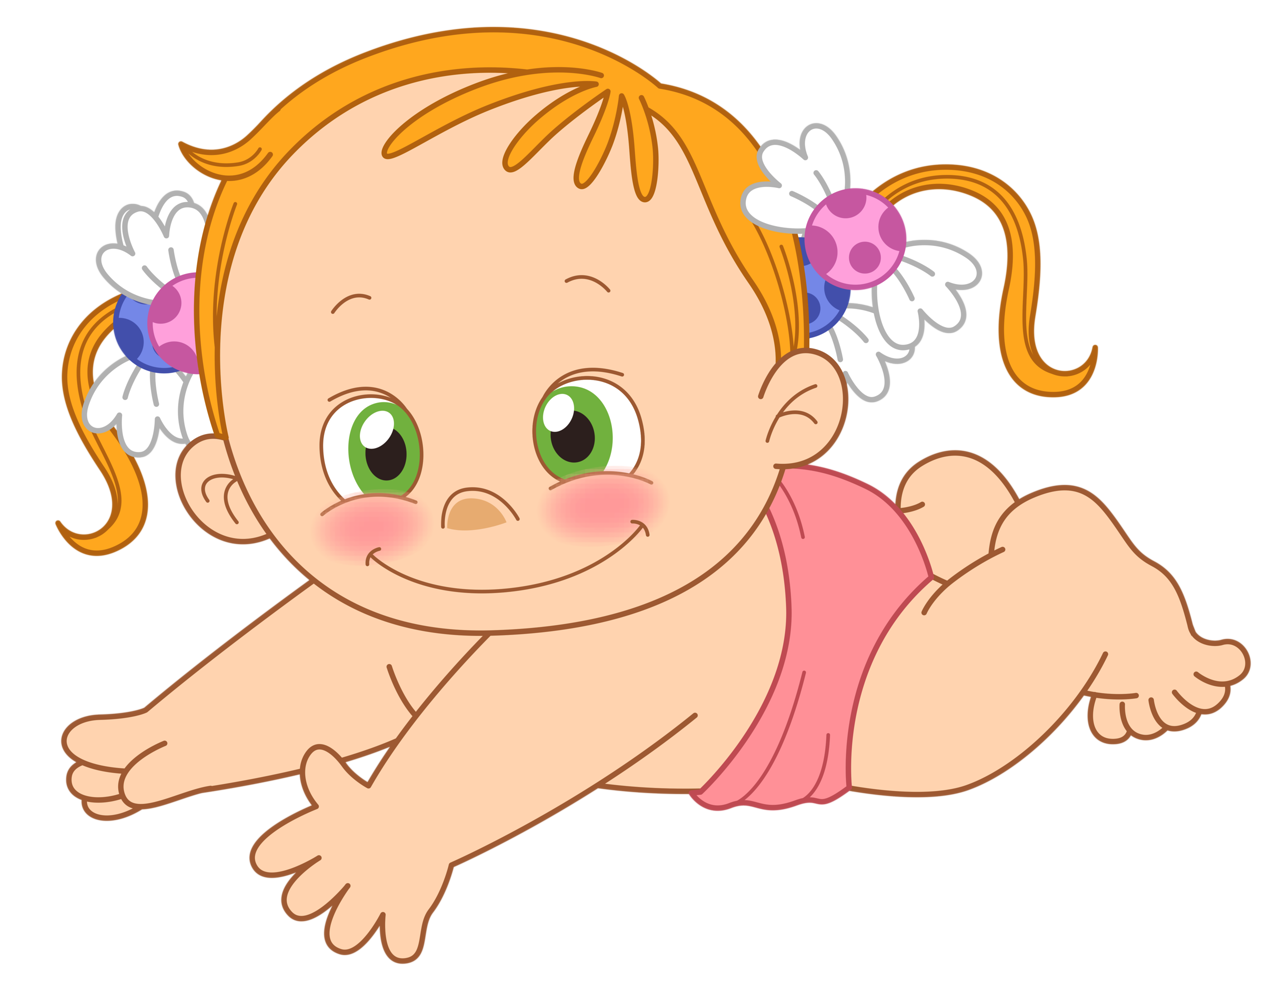  png pinterest babies. Infant clipart baby tummy time